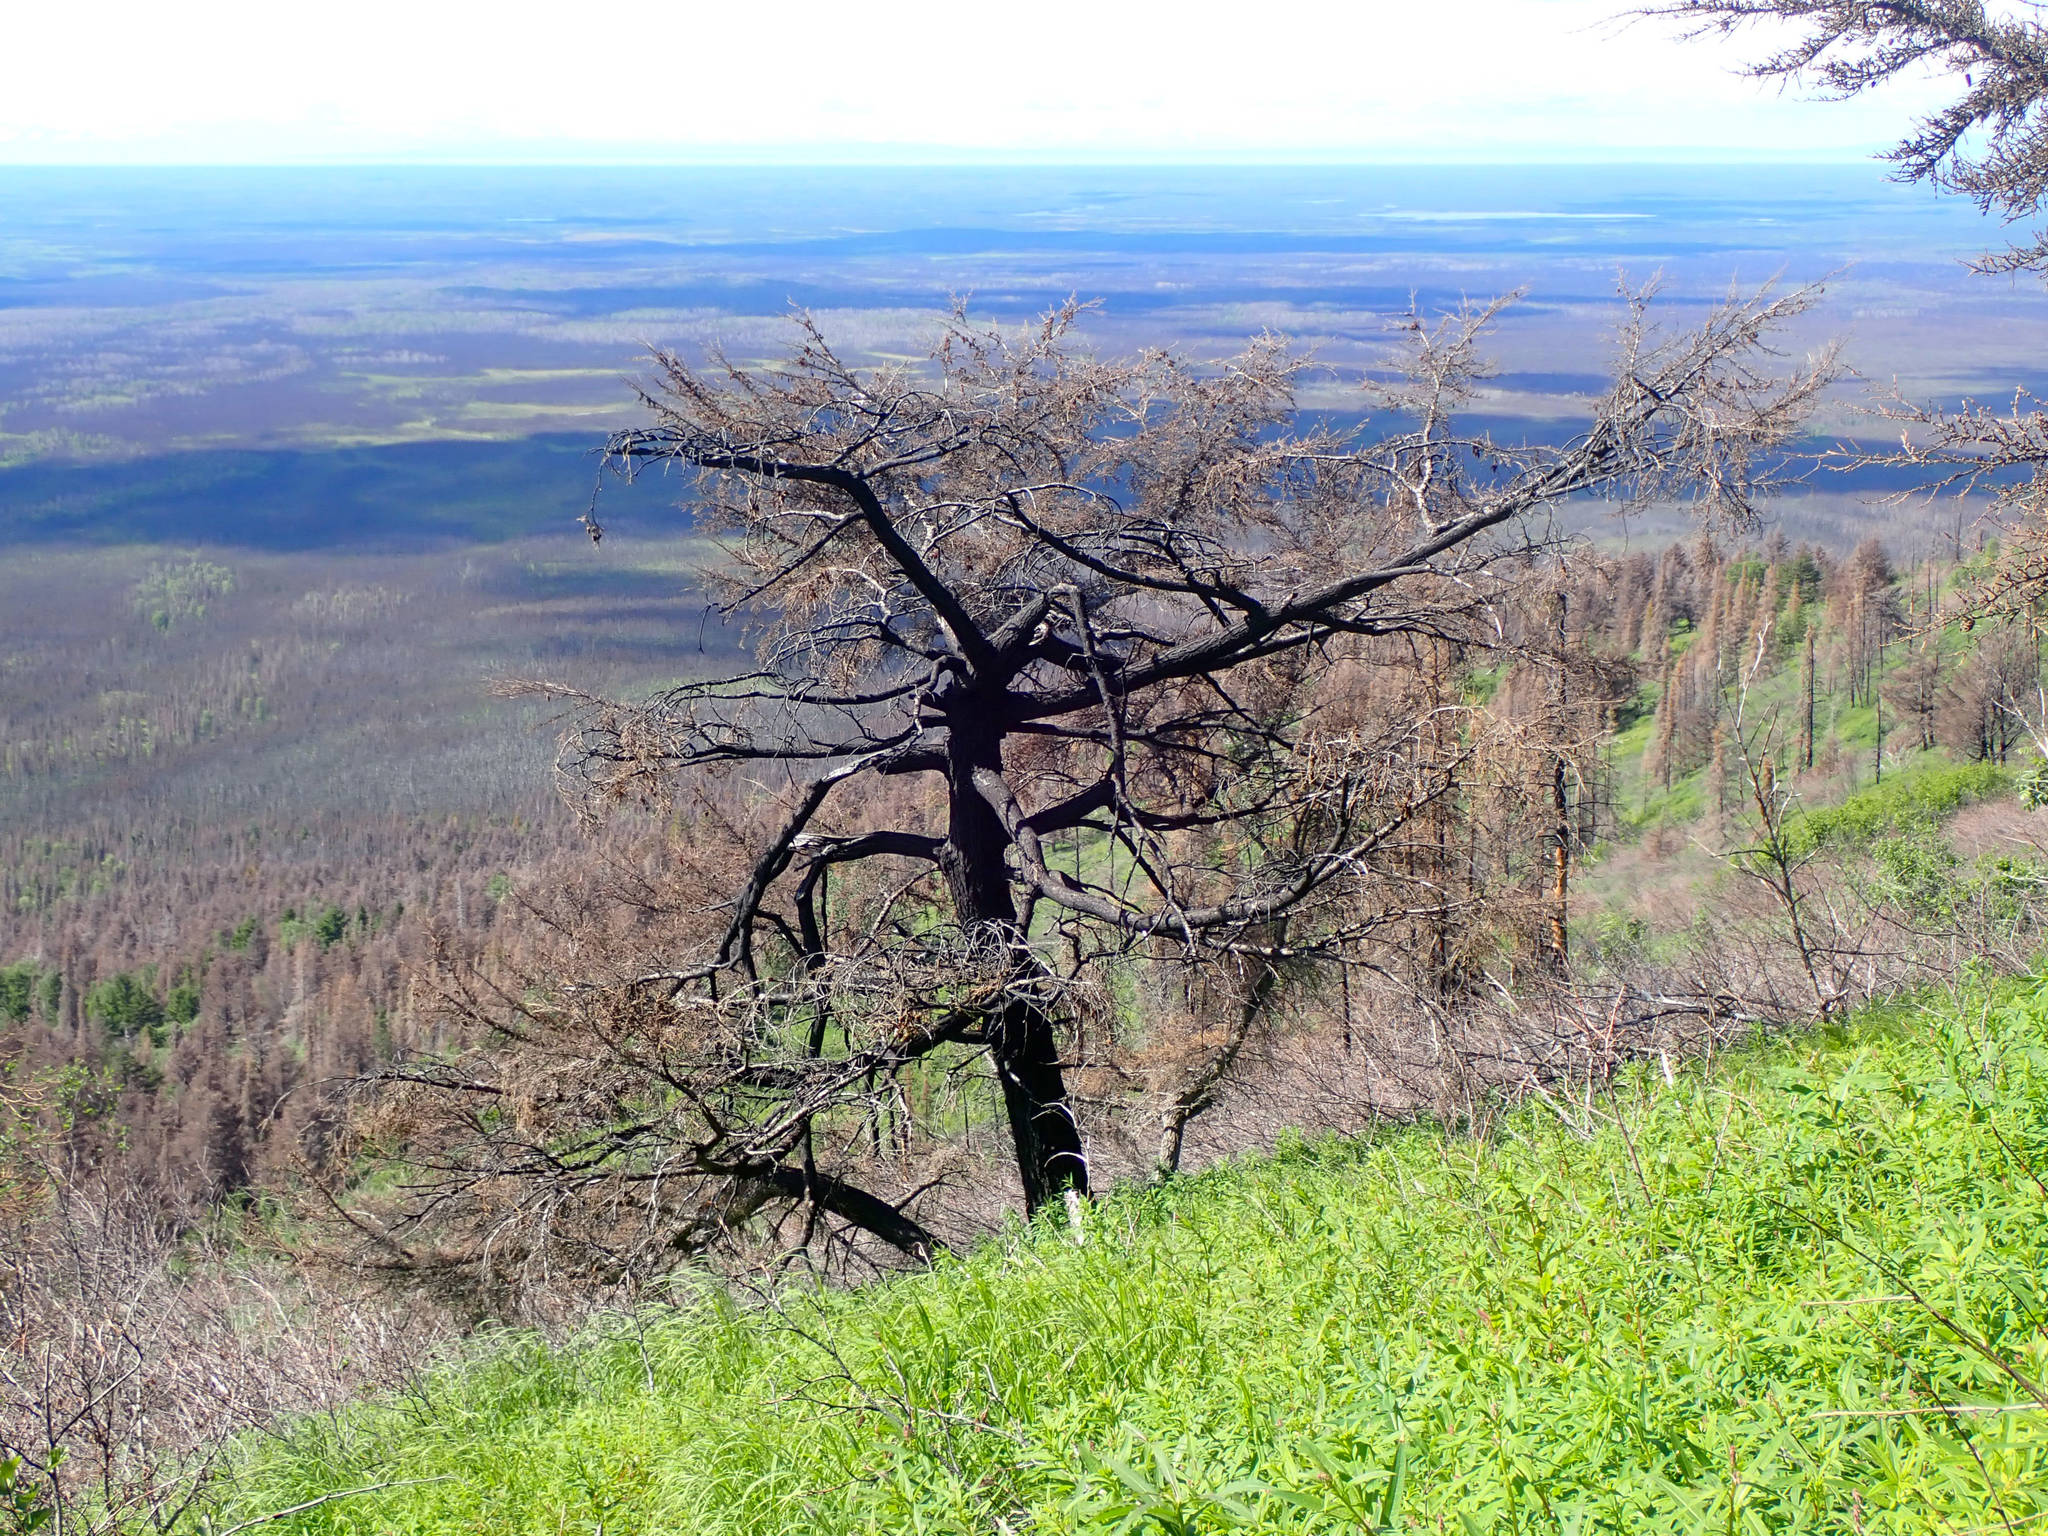 A mountain hemlock burned in the 2019 Swan Lake Fire, pictured June 29, 2021. (Photo by Matt Bowser/USFWS)